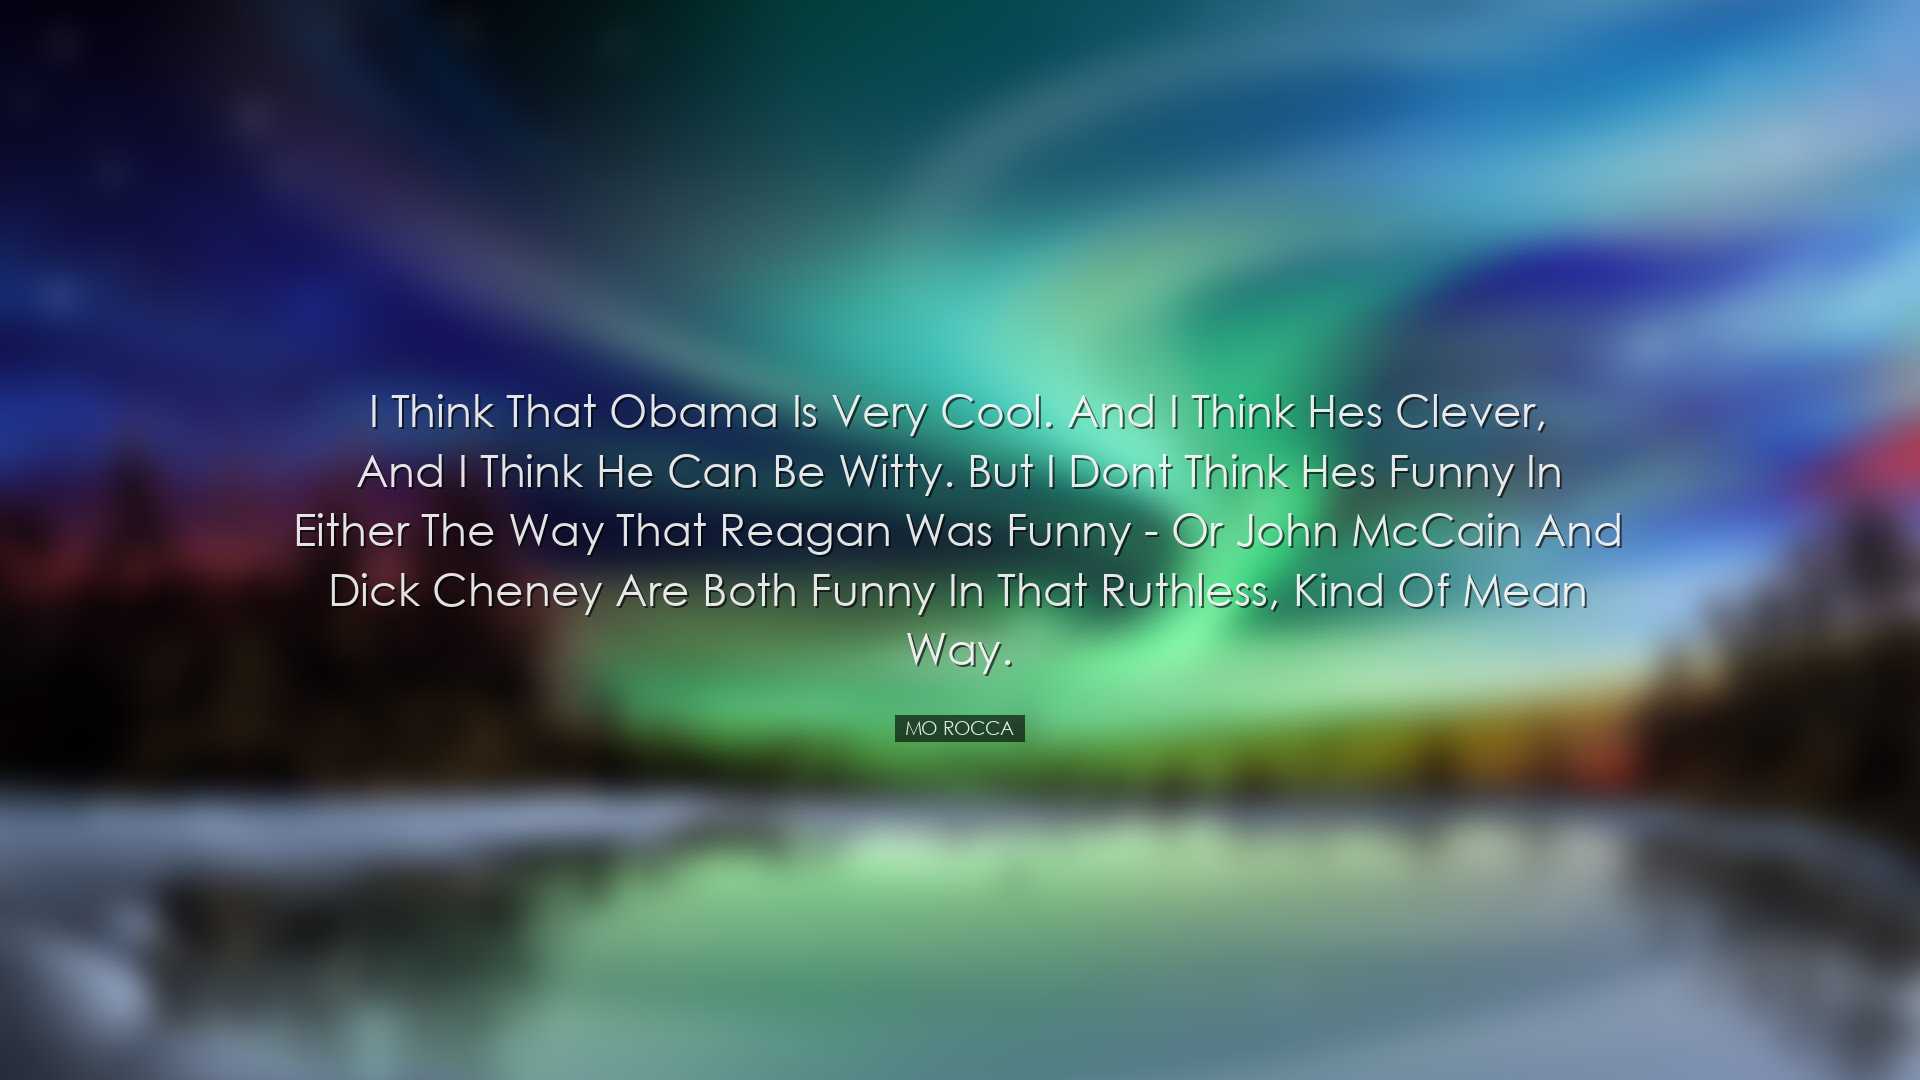 I think that Obama is very cool. And I think hes clever, and I thi